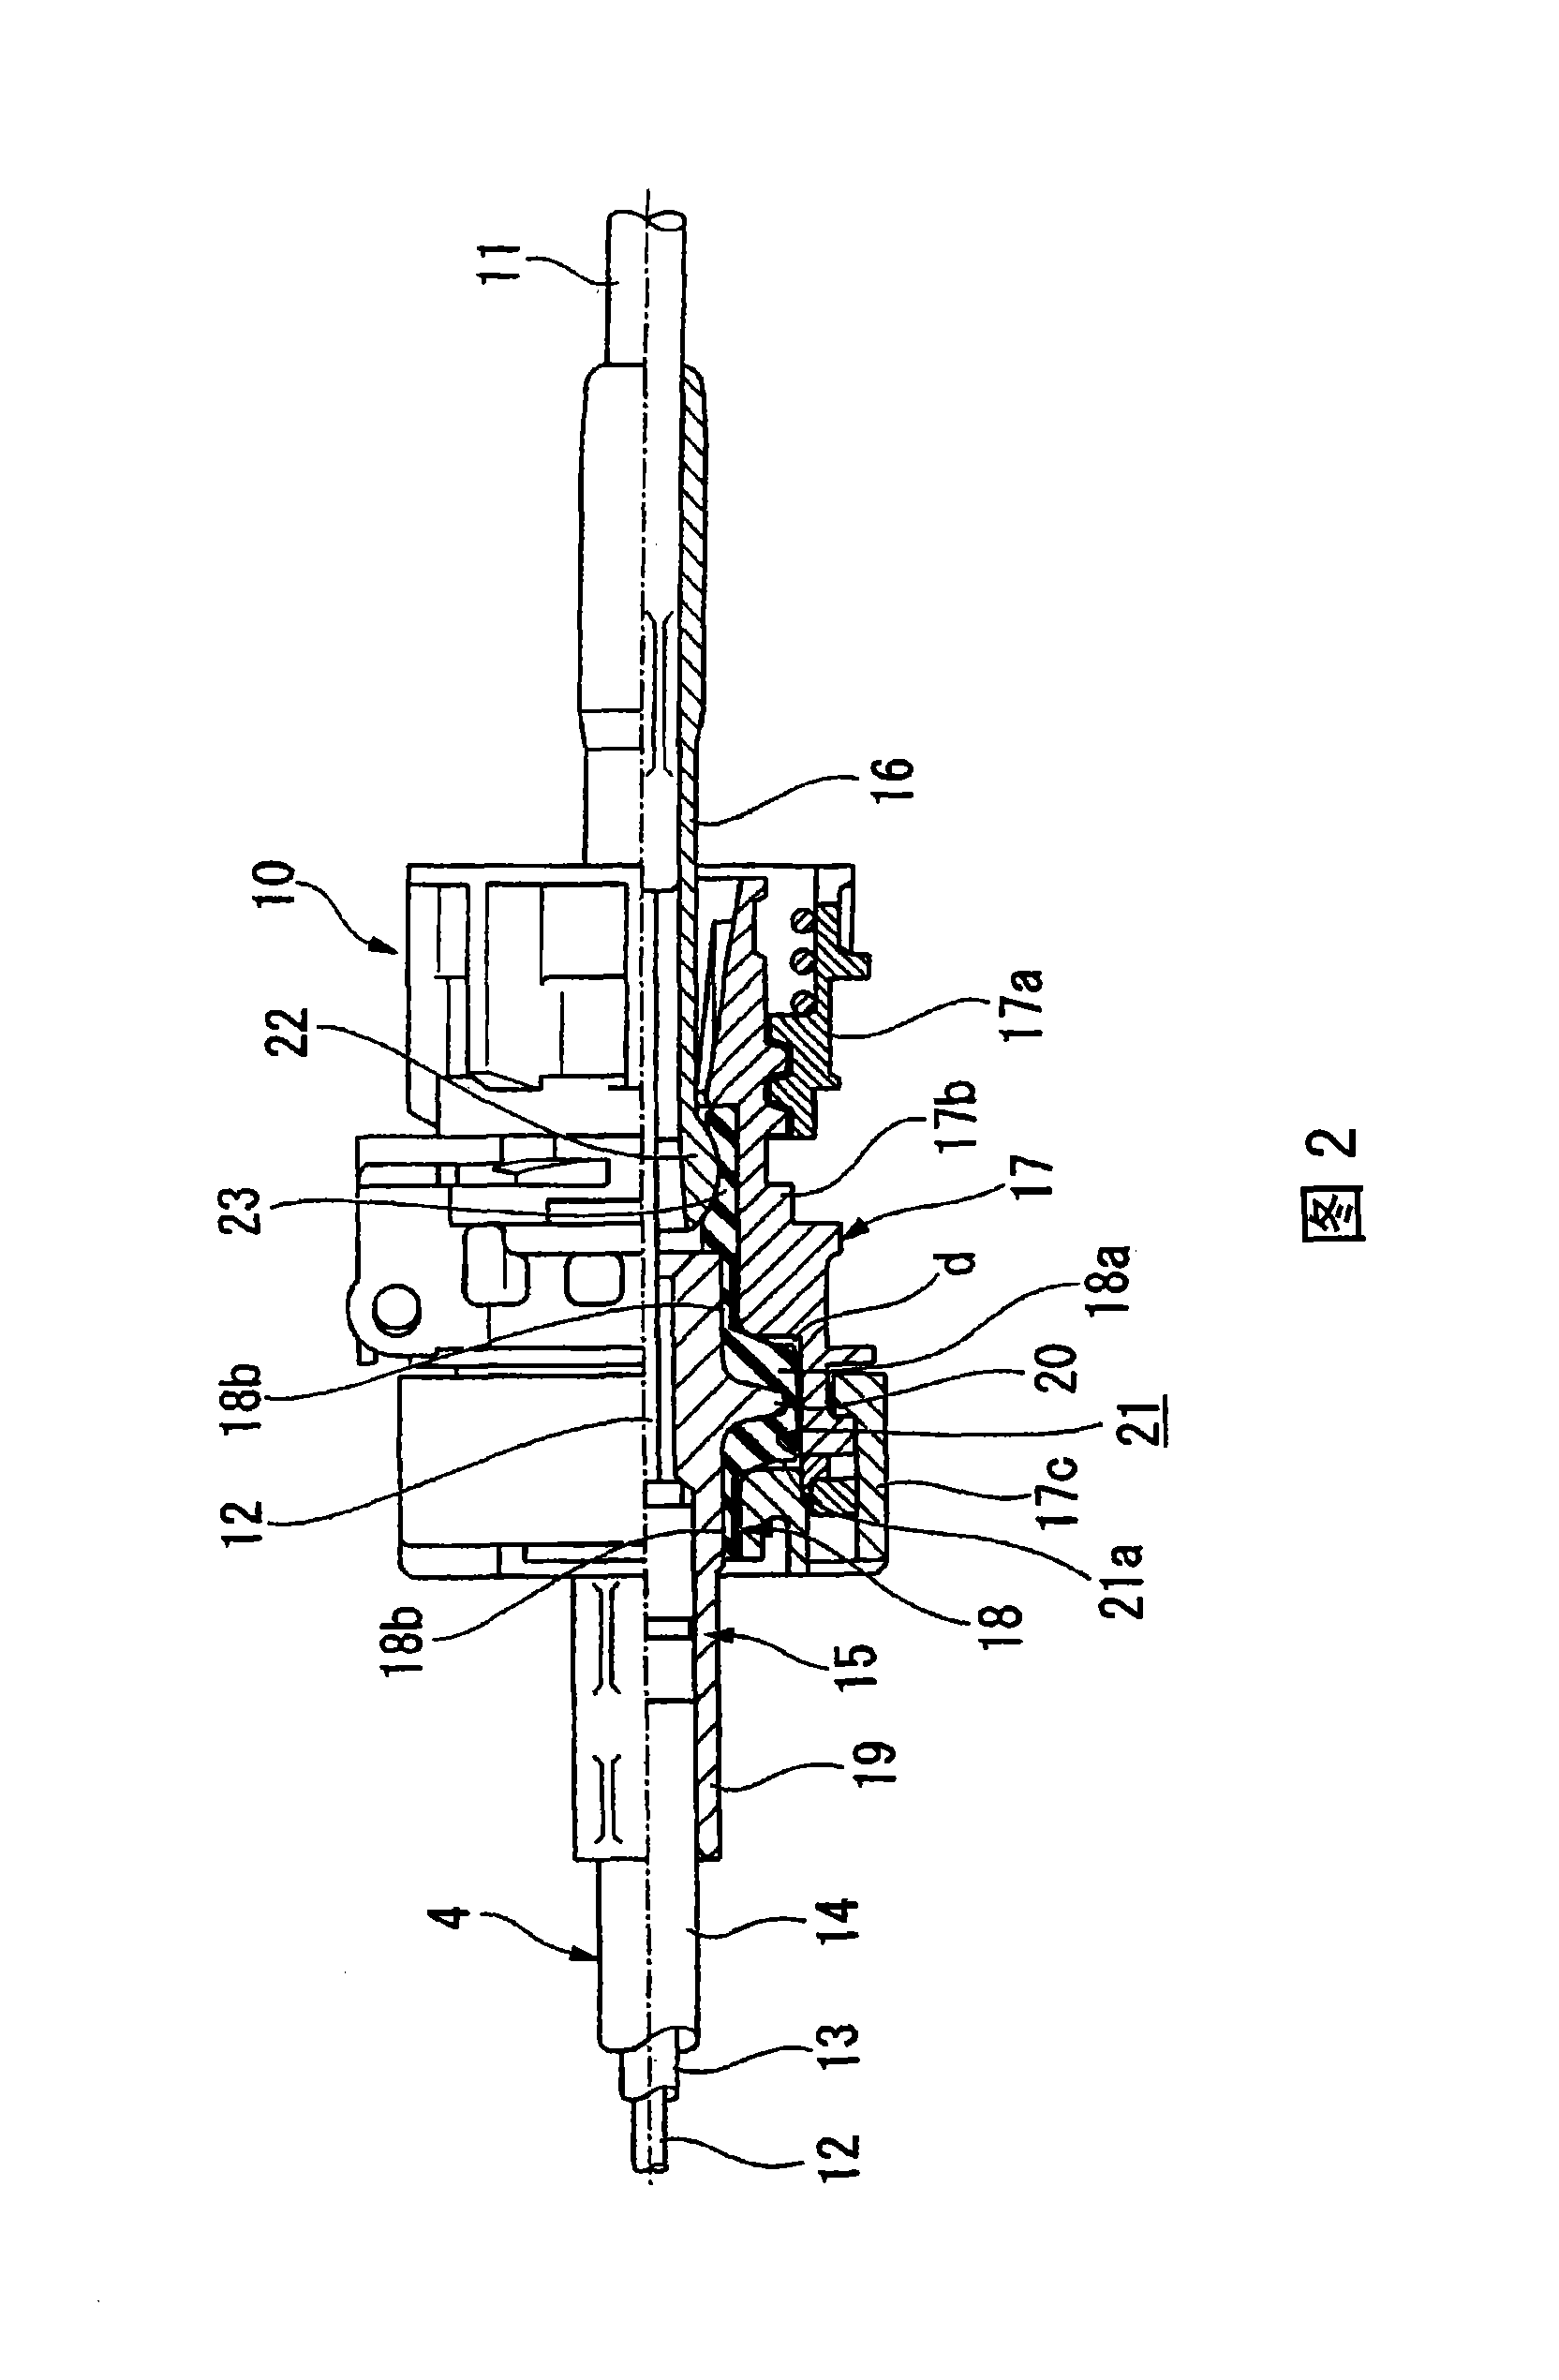 End supporting apparatus for controlling backstay cable